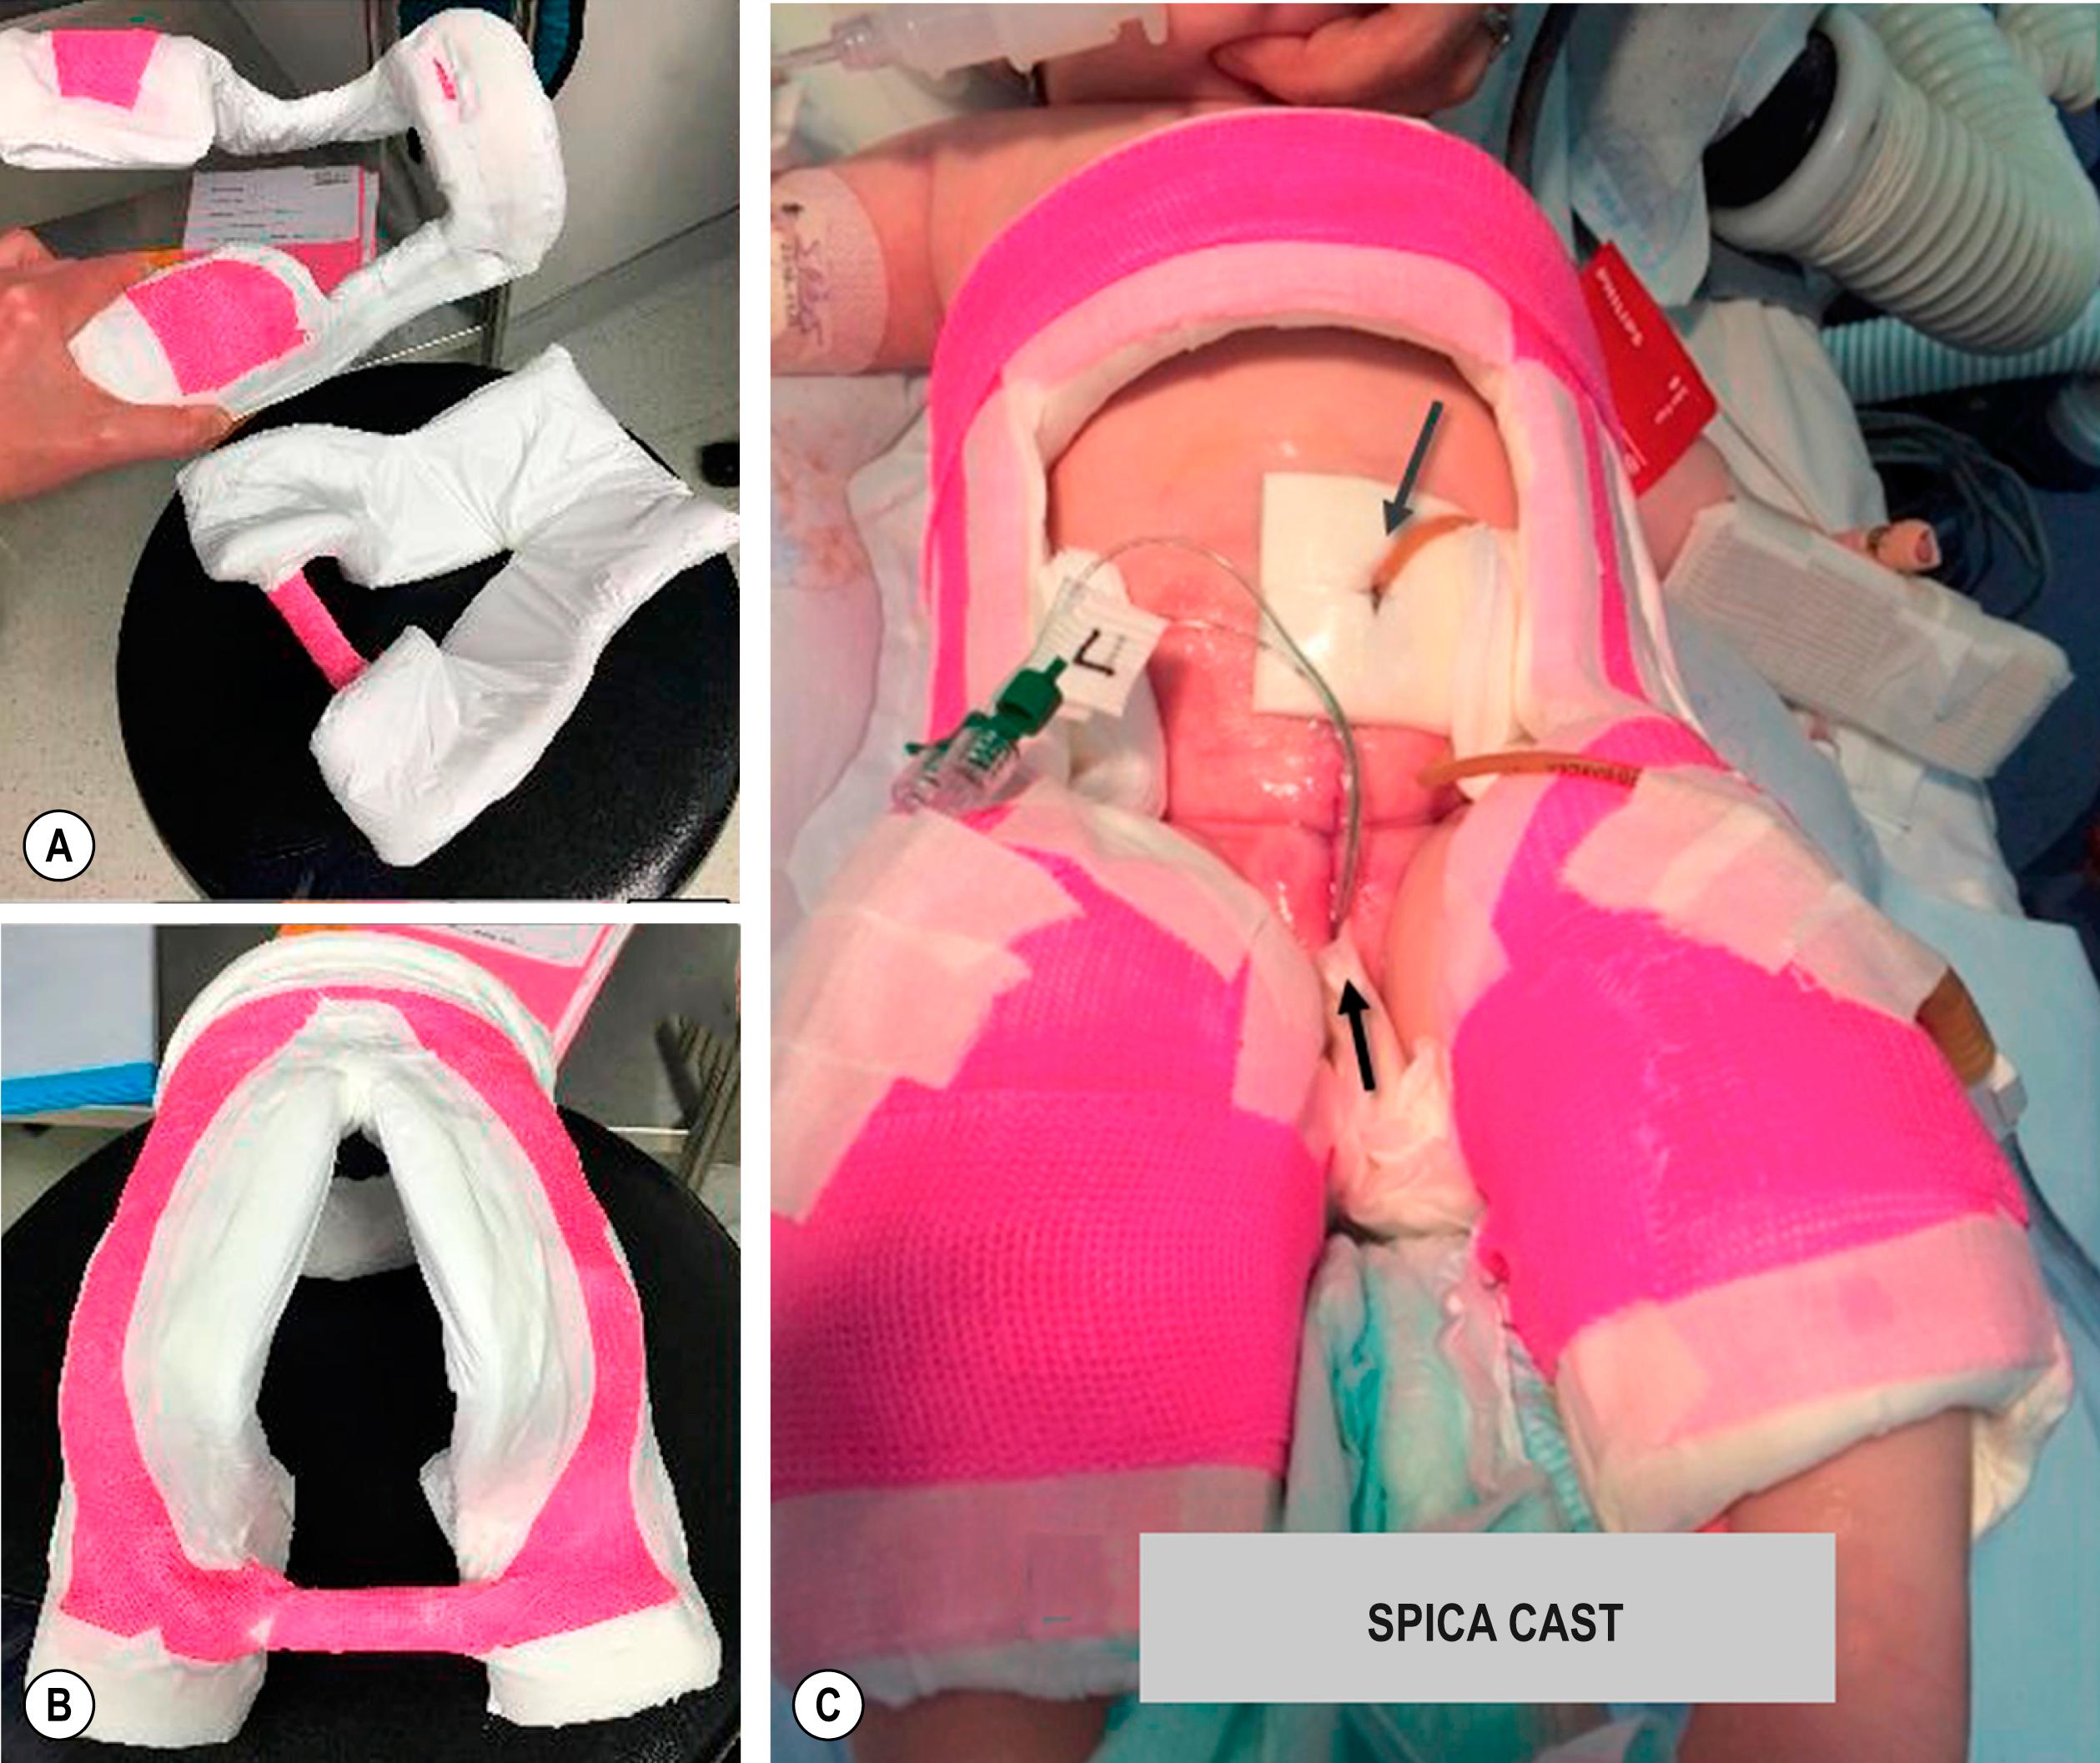 Fig. 58.1, The patient is immobilized after repair to prevent external hip rotation, to decrease lateral stresses on the closure, and to optimize pubic apposition in the early postoperative period. A number of immobilization techniques are possible. This photograph shows a hinged spica cast from anterior view (A) with a large section open to allow visualization of the abdomen. In the posterior view (B) , a section is open to provide access to the tunneled epidural site and to enable diaper changes. In (C) , note the suprapubic bladder catheter (long arrow), and two ureteral stents (short arrow) that act as a urethral catheter.